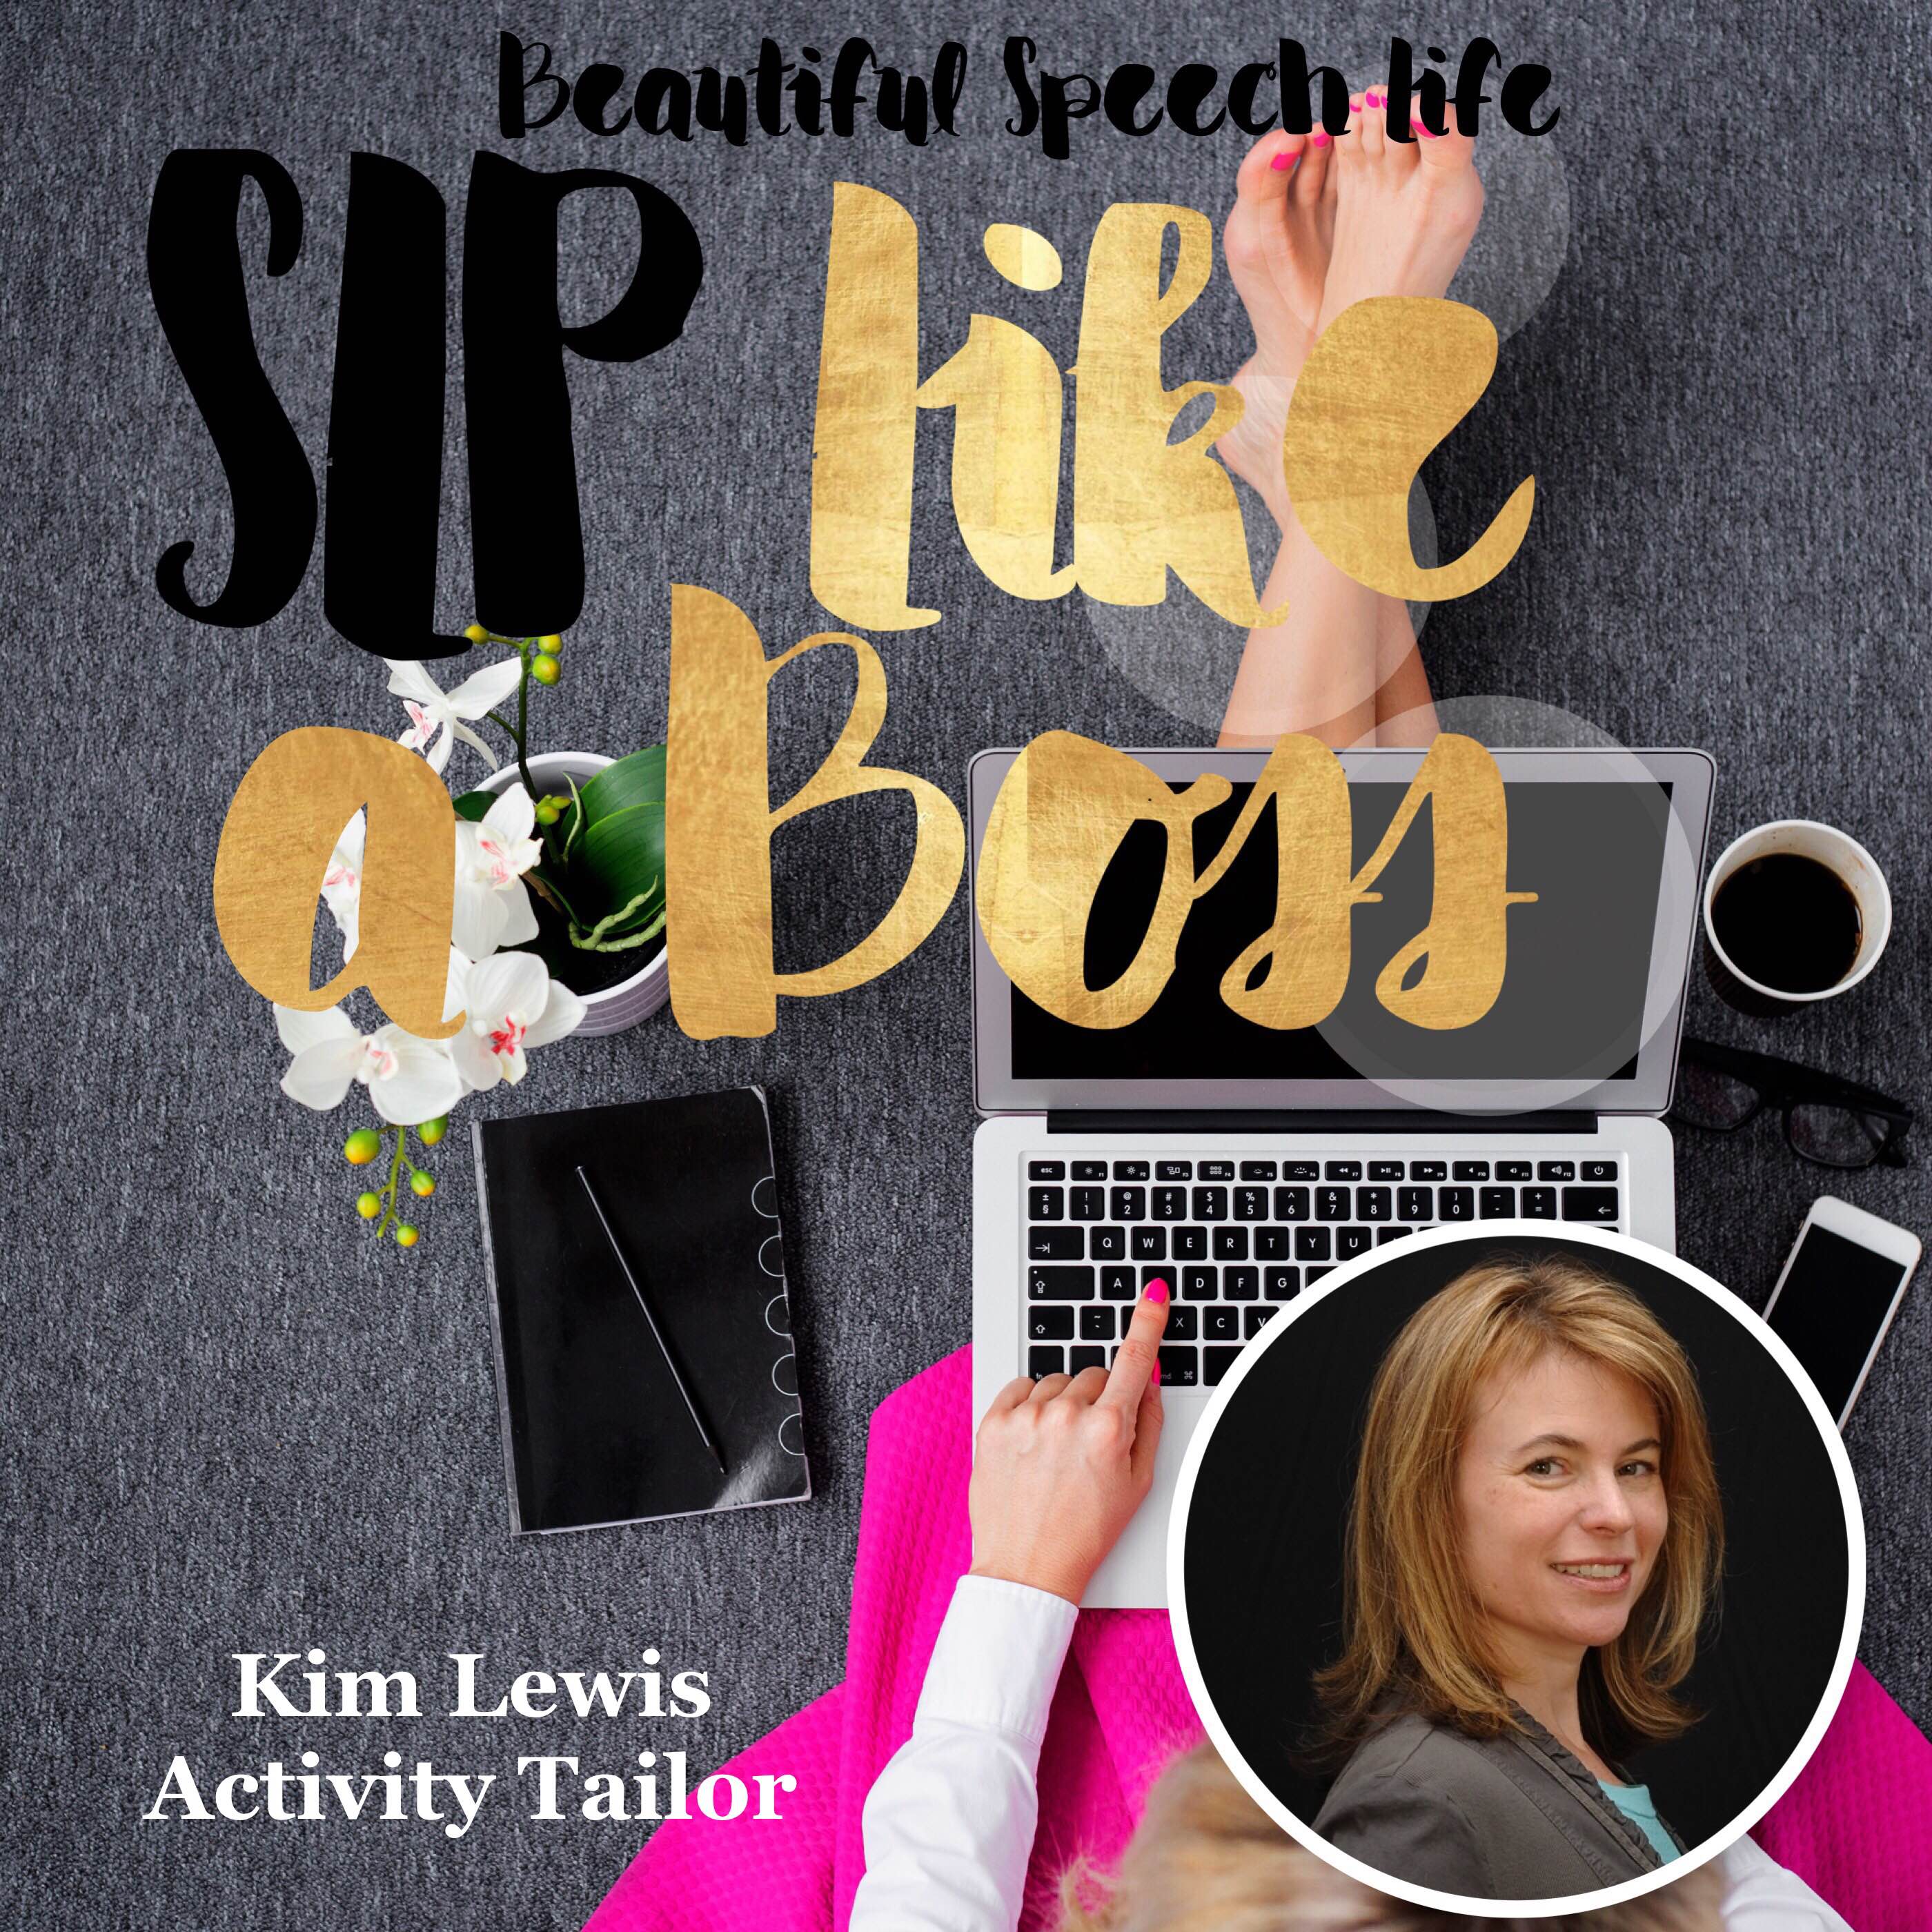 SLP Like a Boss with Kim Lewis from Activity Tailor